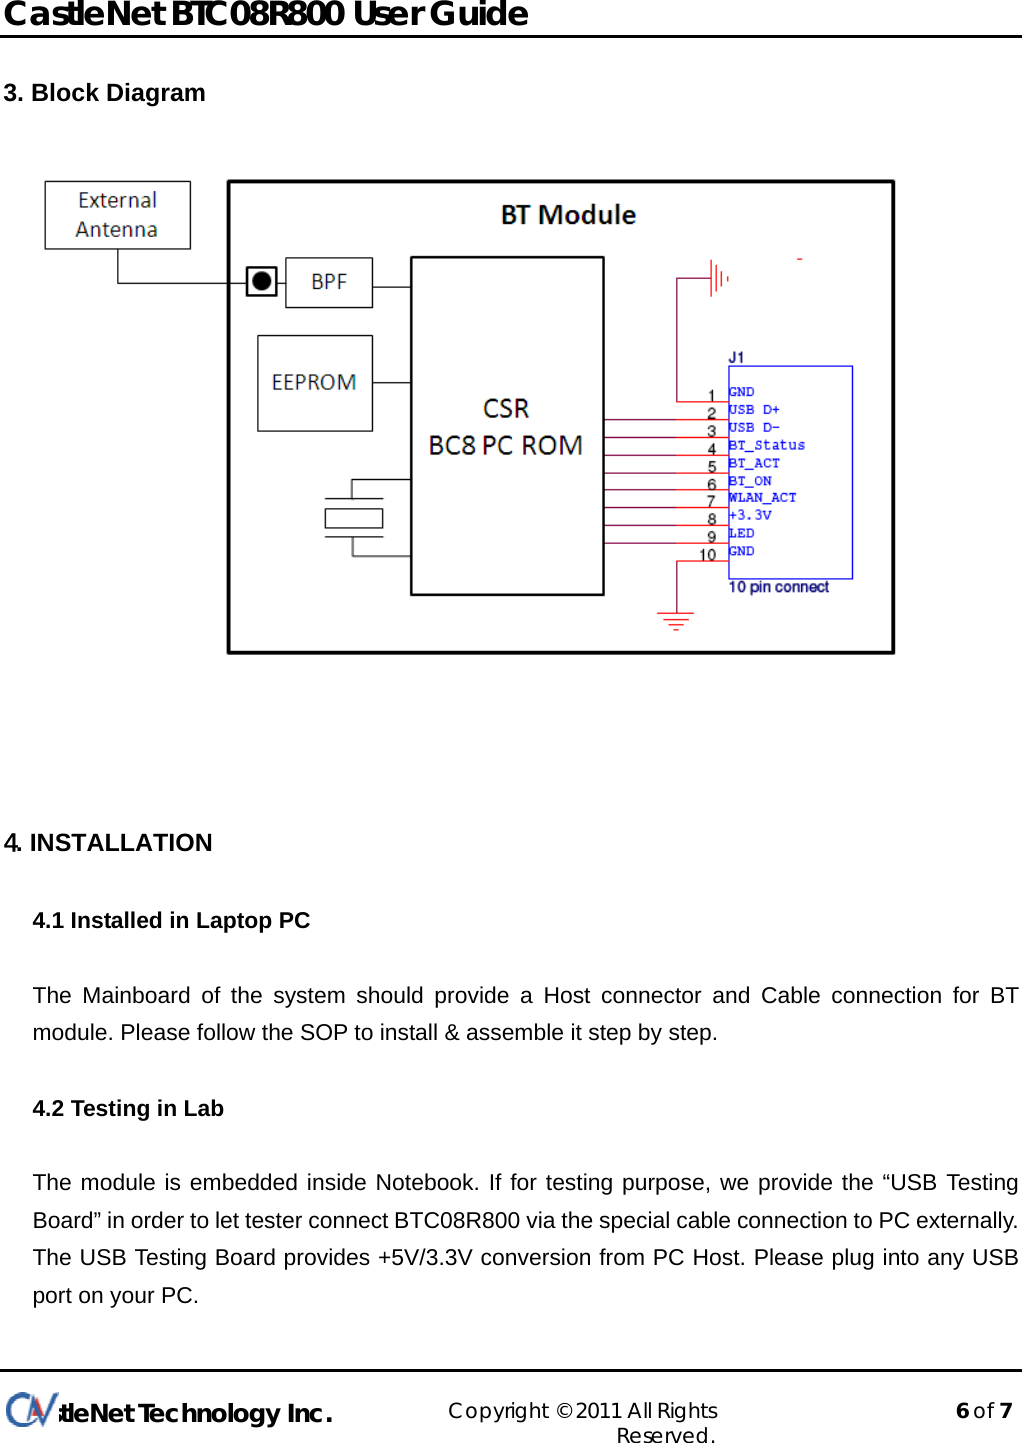  CastleNet BTC08R800 User Guide              CastleNet Technology Inc. Copyright © 2011 All Rights Reserved.    6 of 7  3. Block Diagram     4. INSTALLATION 4.1 Installed in Laptop PC  The Mainboard of the system should provide a Host connector and Cable connection for BT module. Please follow the SOP to install &amp; assemble it step by step.  4.2 Testing in Lab  The module is embedded inside Notebook. If for testing purpose, we provide the “USB Testing Board” in order to let tester connect BTC08R800 via the special cable connection to PC externally. The USB Testing Board provides +5V/3.3V conversion from PC Host. Please plug into any USB port on your PC. 